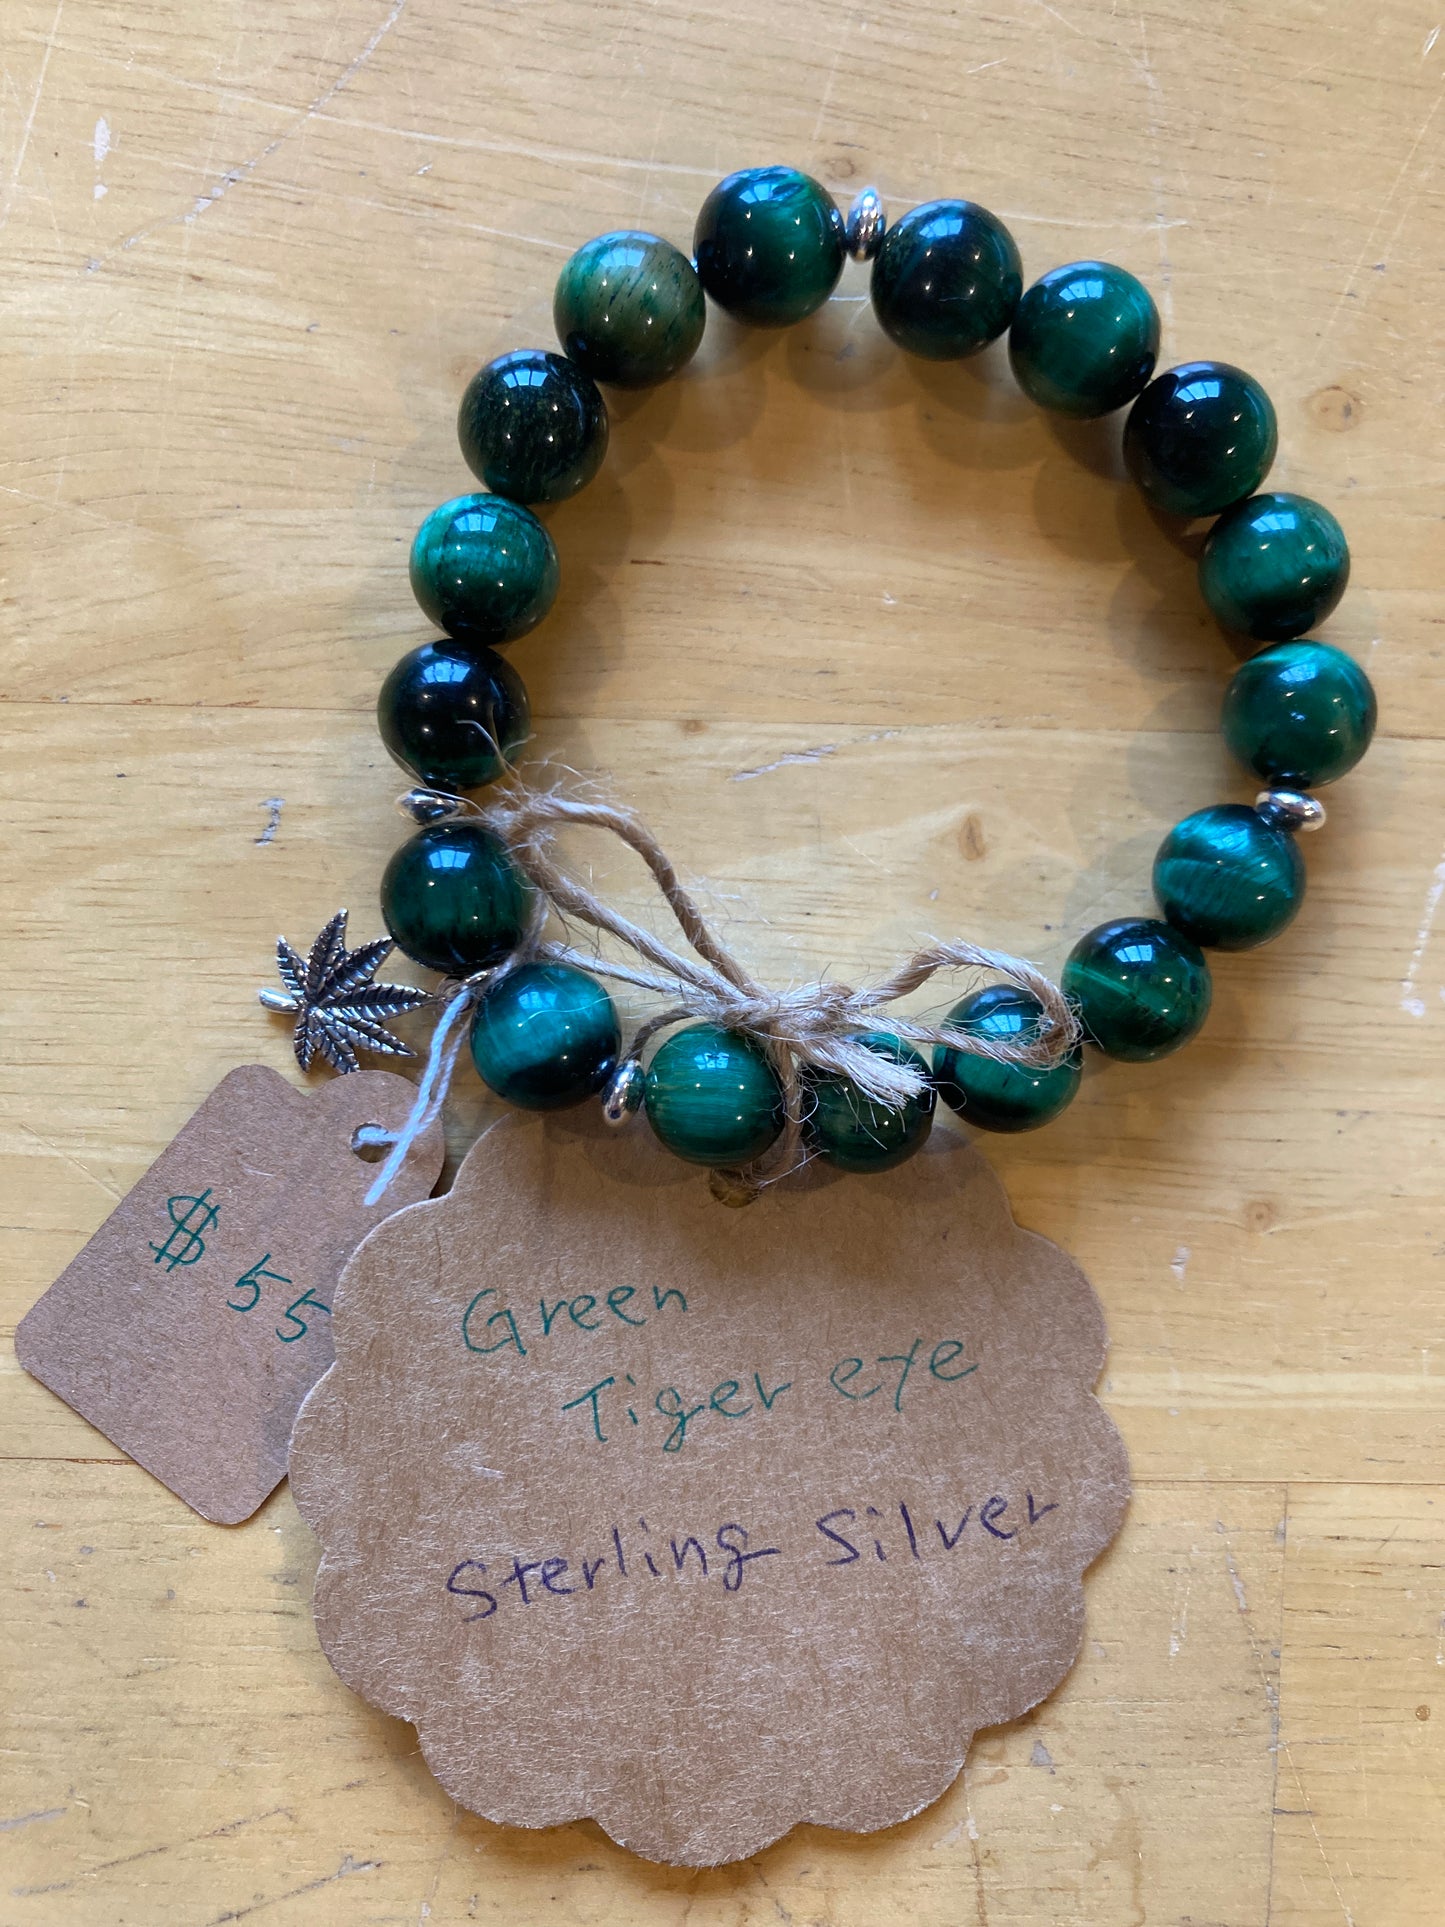 POWER STONE BRACELET 55: Hand-crafted Pot Leaf Power Stone Bracelet with Green Tiger-eye and Sterling Silver Charm